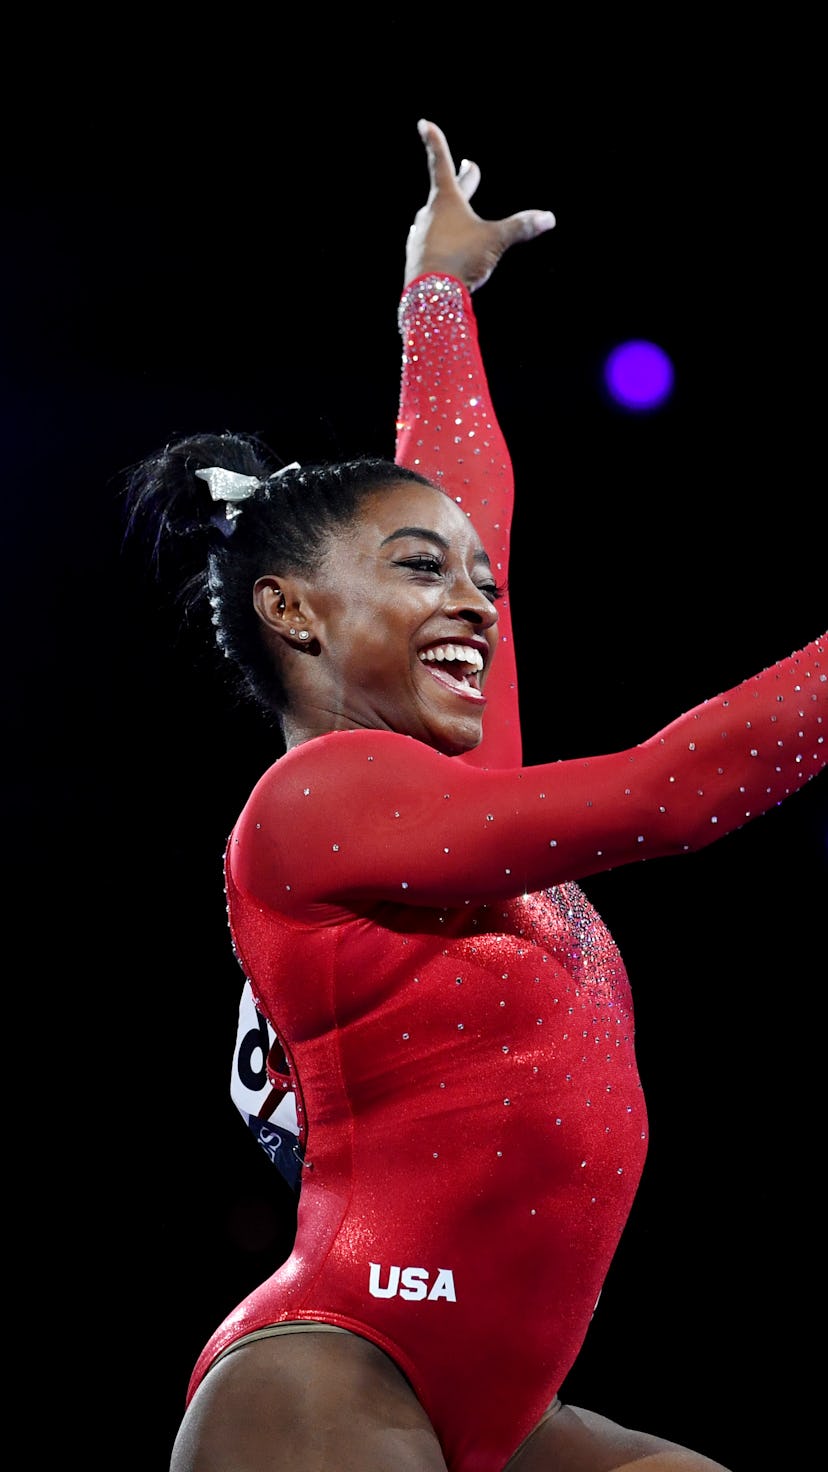 Simone Biles is wearing a red leotard and is smiling while performing at a competition.